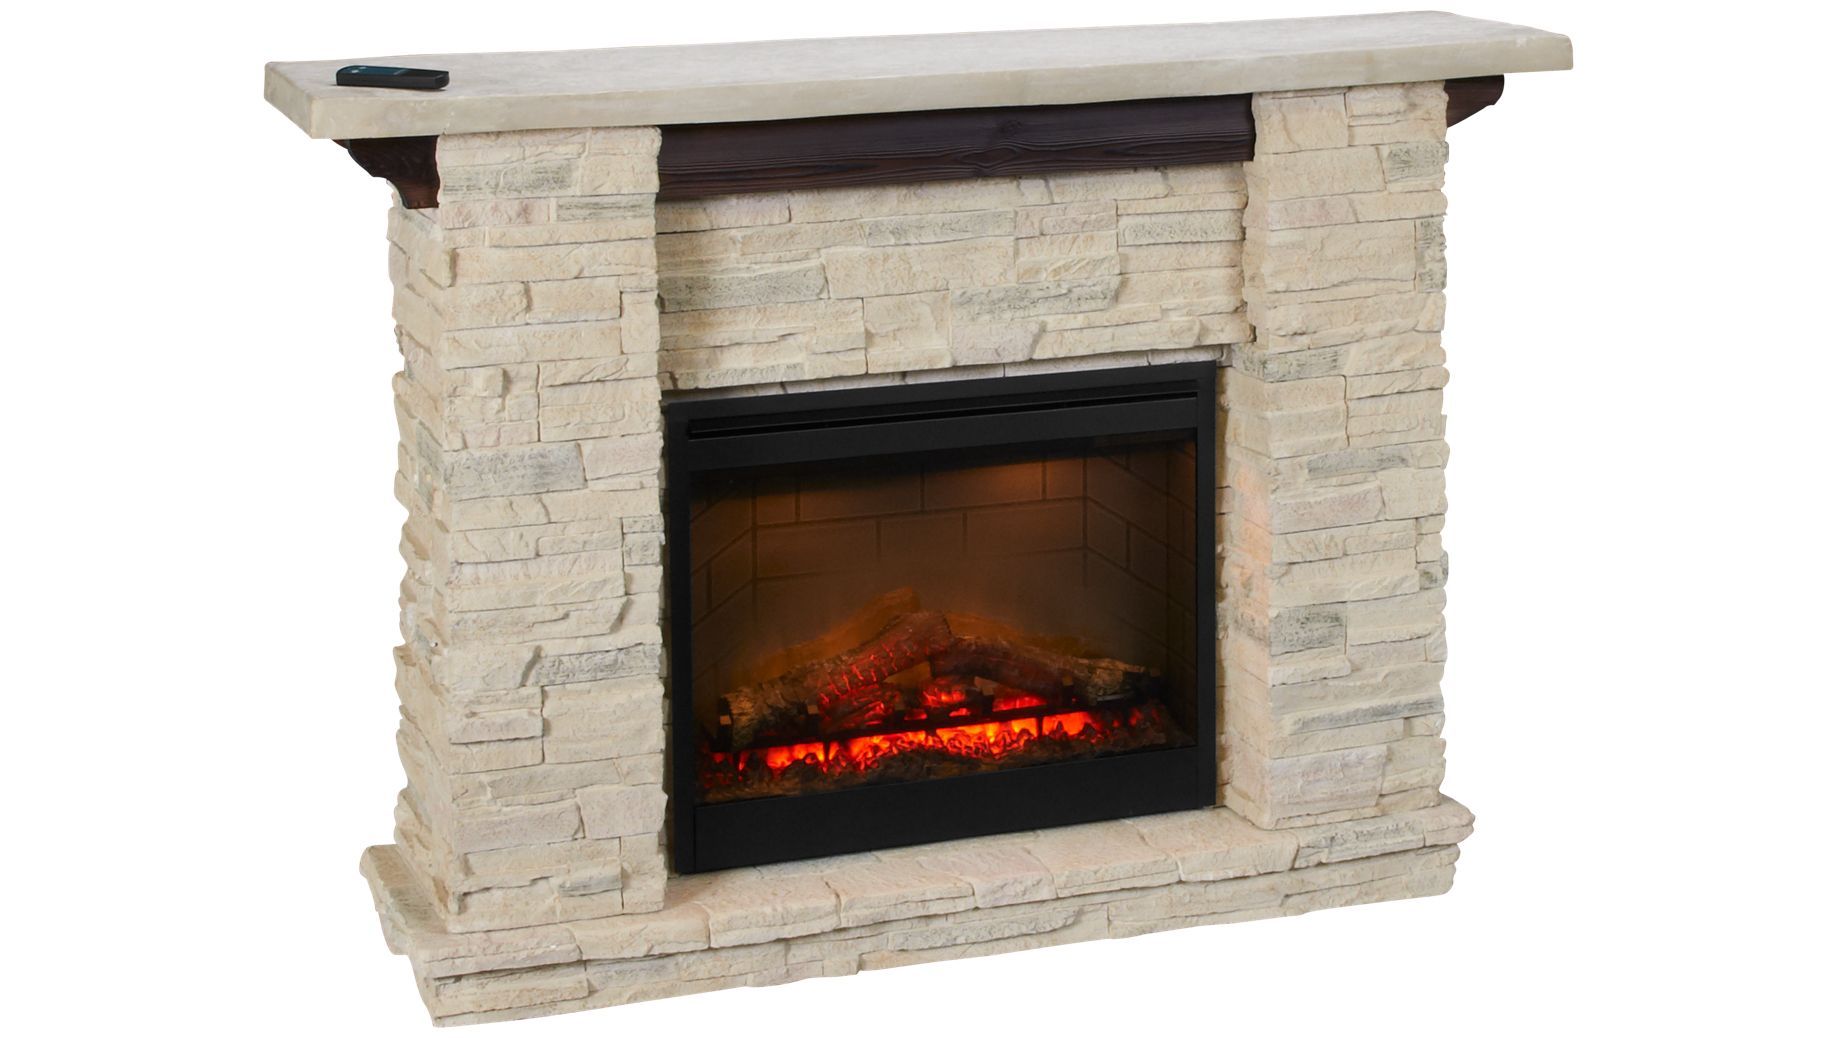 Heat N Glo Fireplace Flame Adjustment Unique Dimplex Featherstone Featherstone Fireplace with Remote